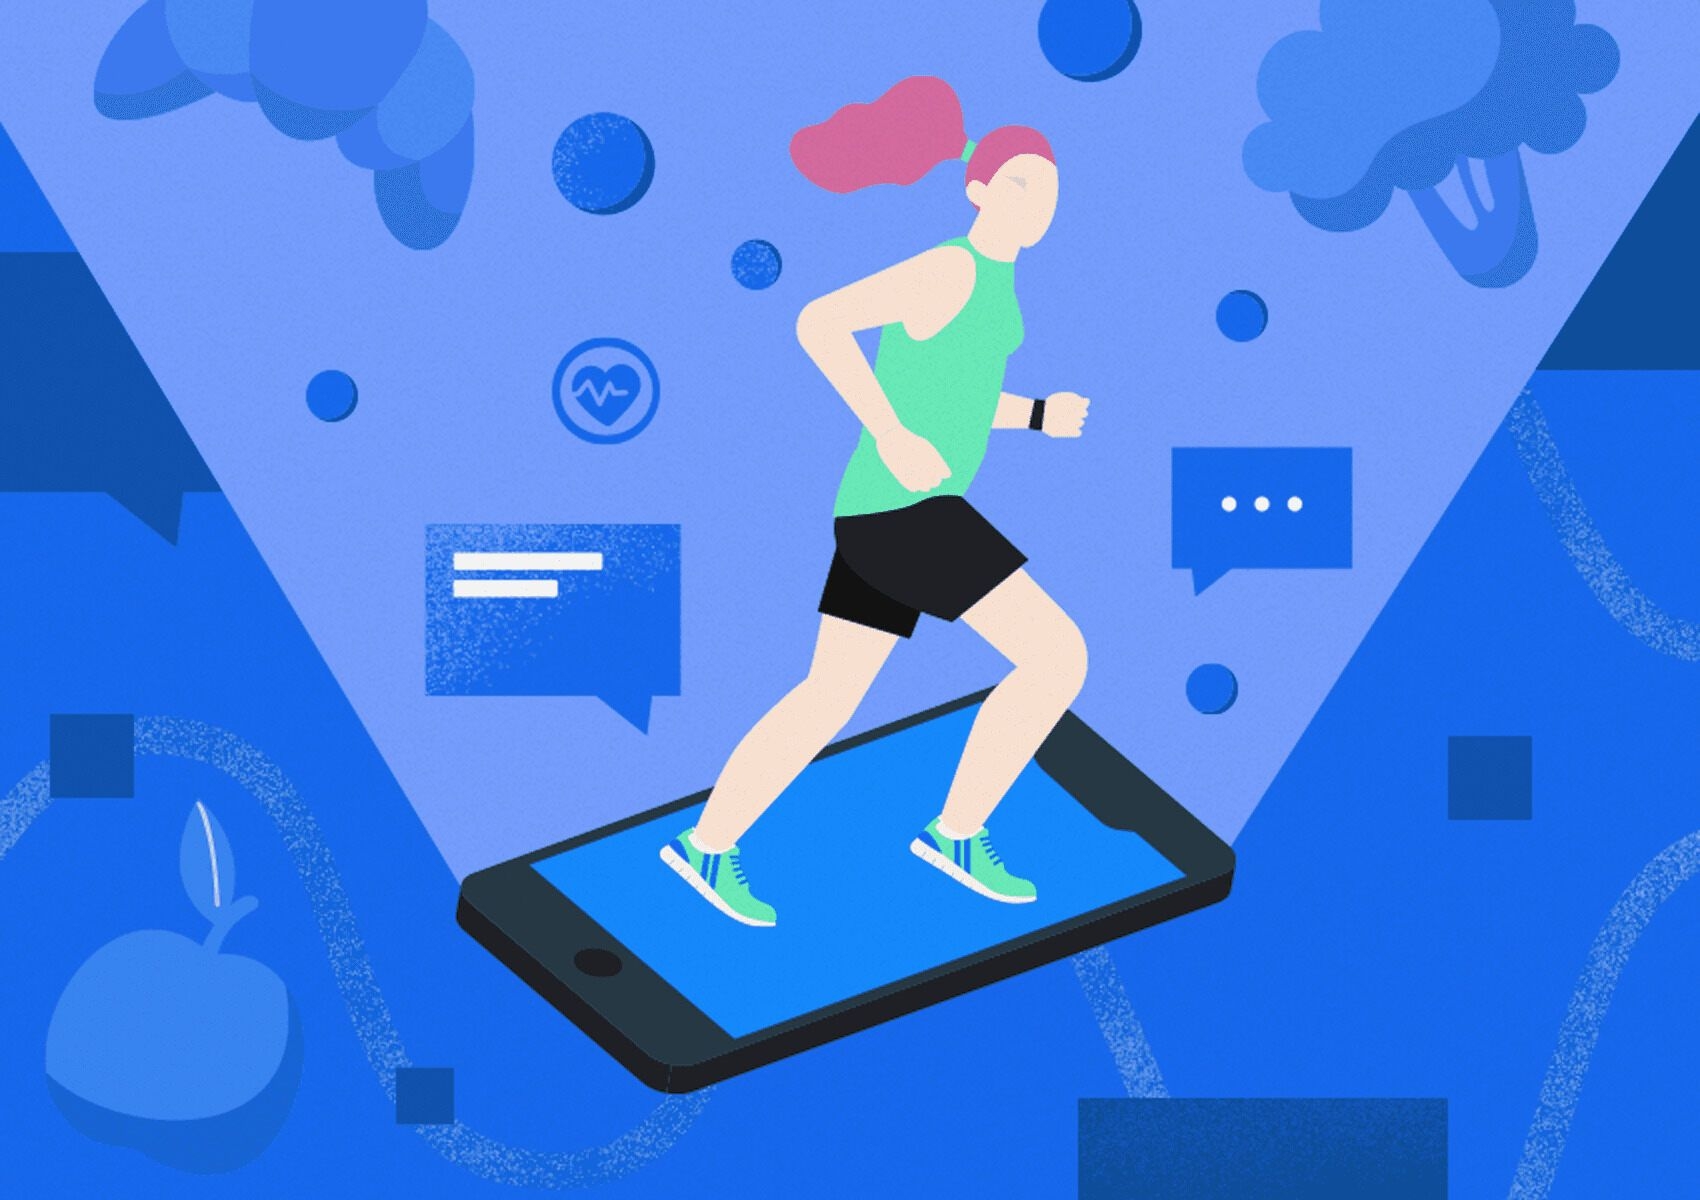 create a fitness and nutrition app